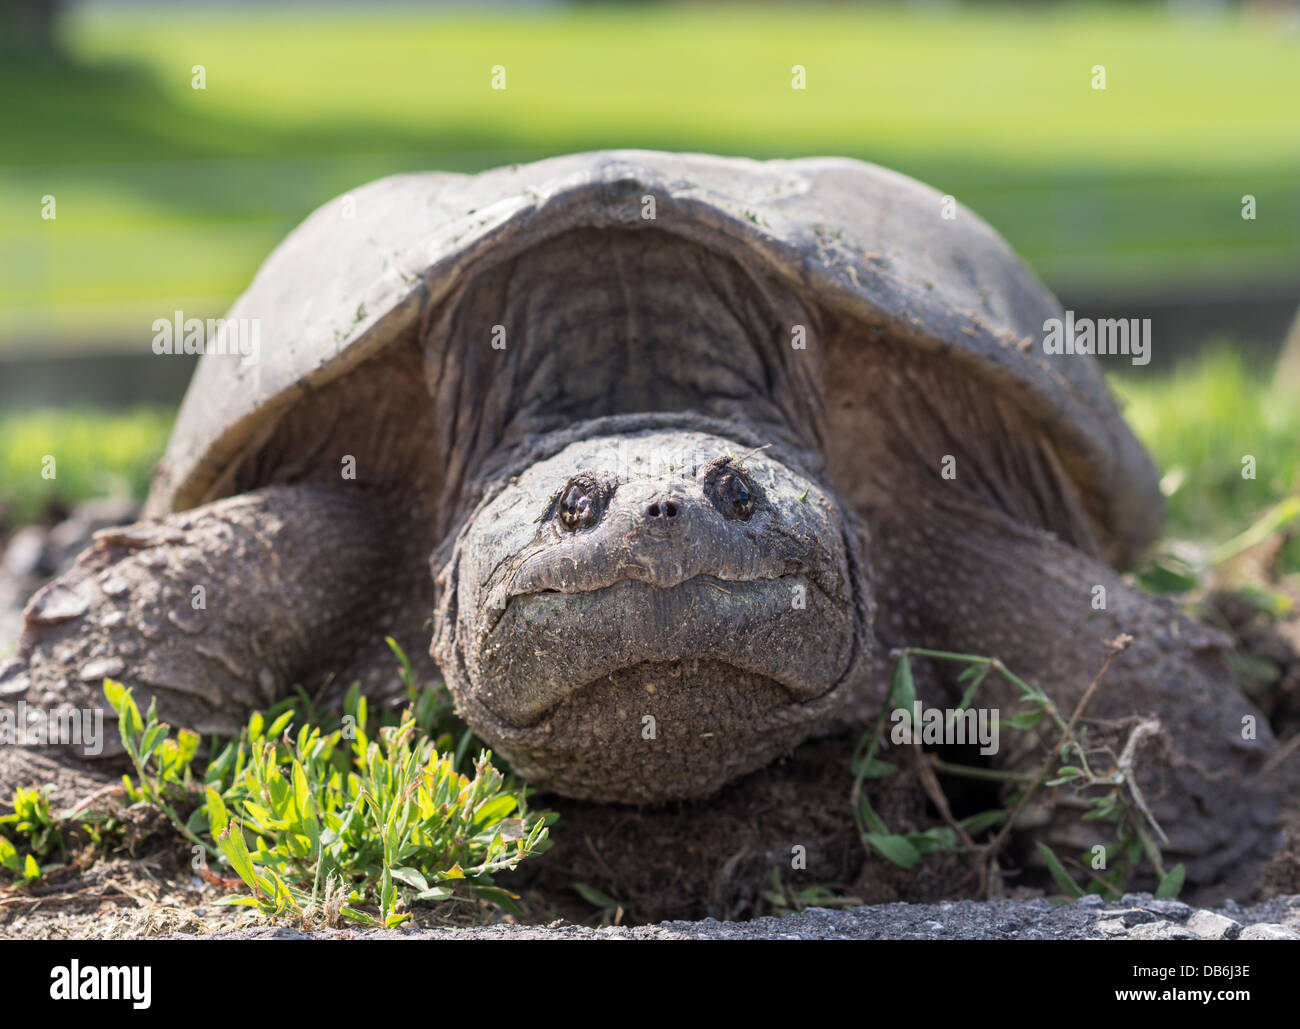 Female Snapping Turtle Closeup. Large turtle laying eggs at the side of a road.  Ottawa, Ontario, Canada Stock Photo